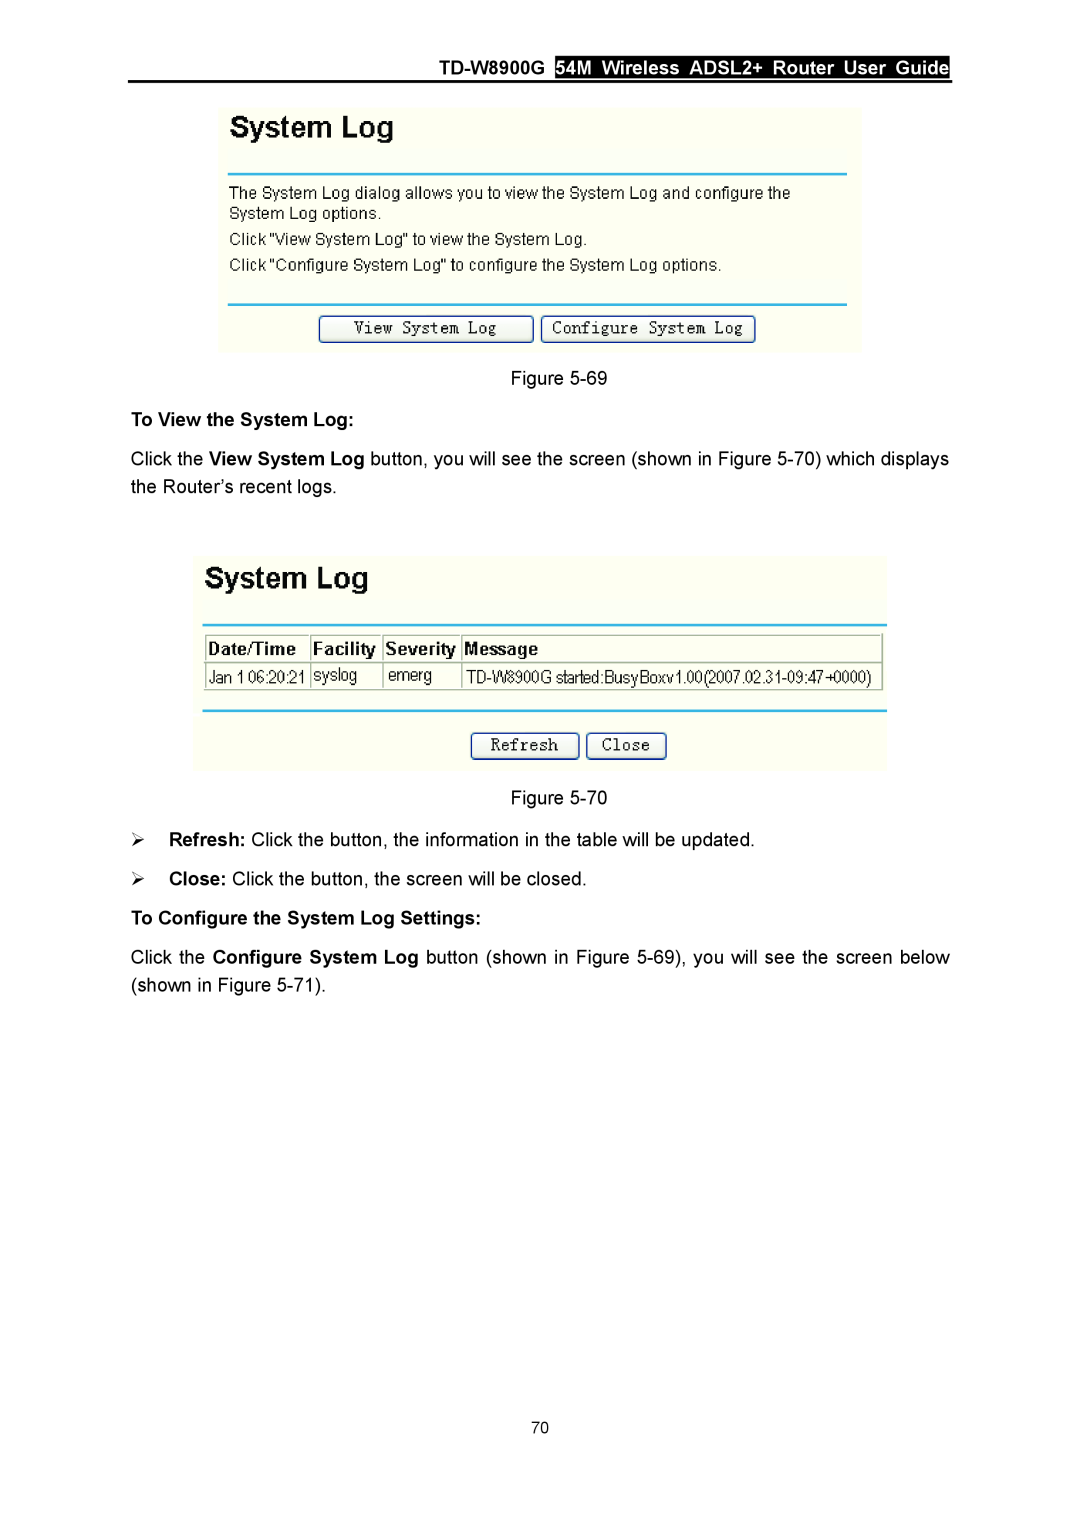 TP-Link TD-W8900G 54M Wireless ADSL2+ Router User Guide, To View the System Log, To Configure the System Log Settings 